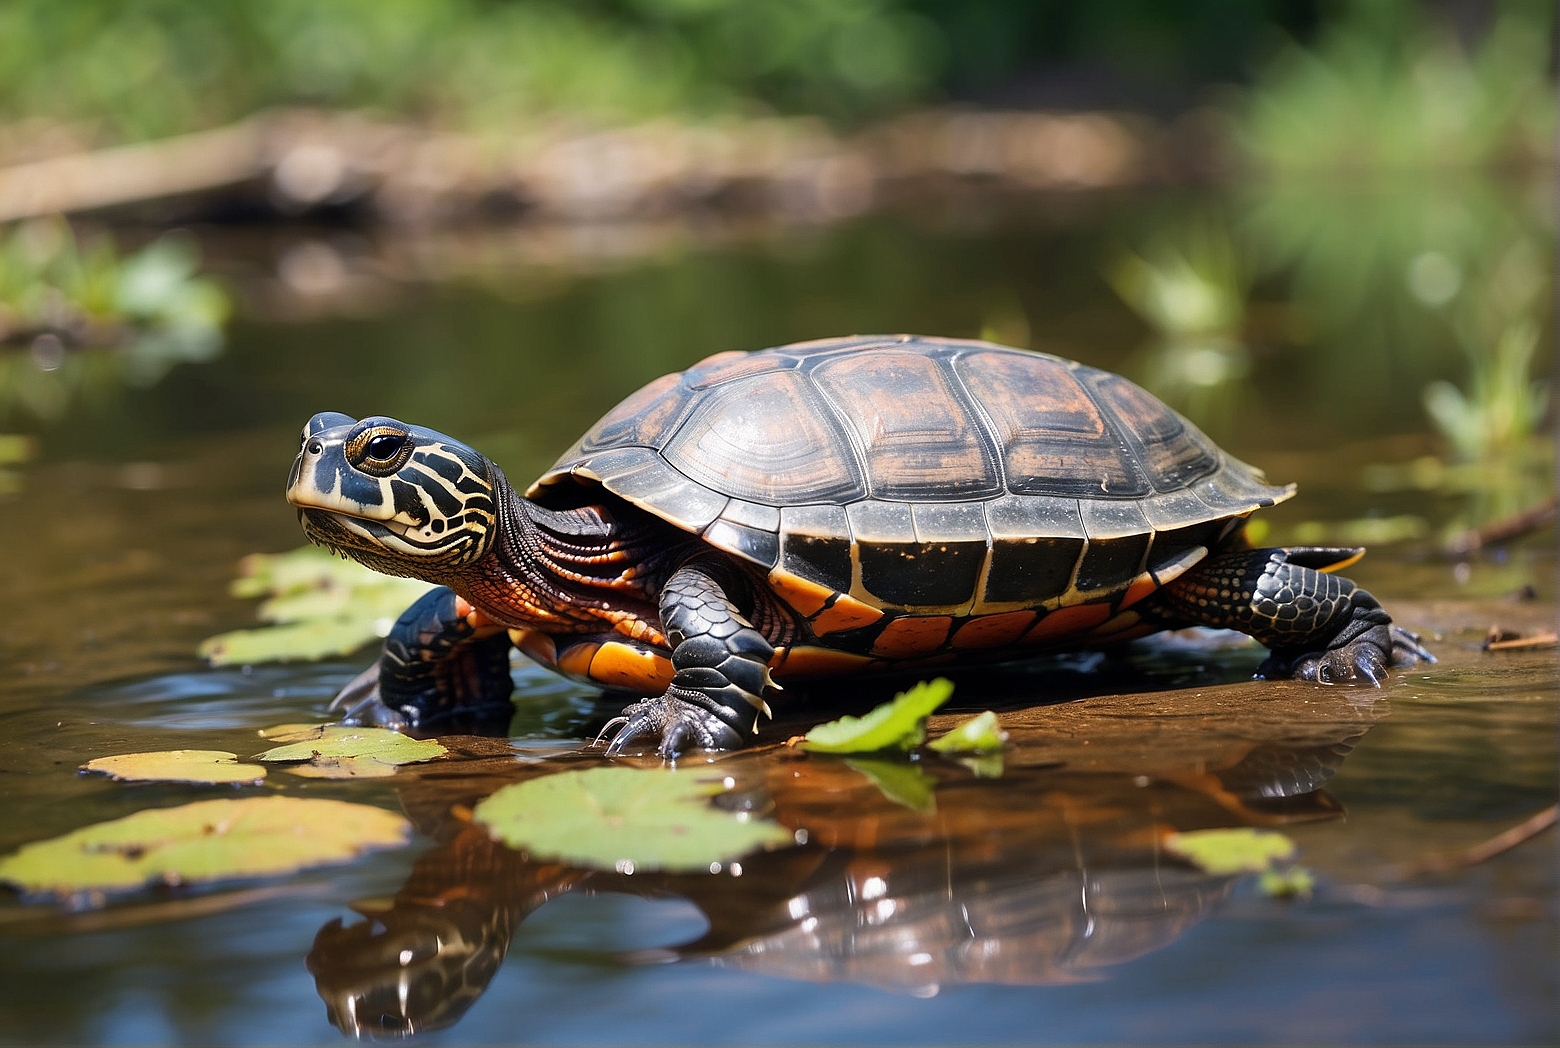 The Growth Rate of Painted Turtles